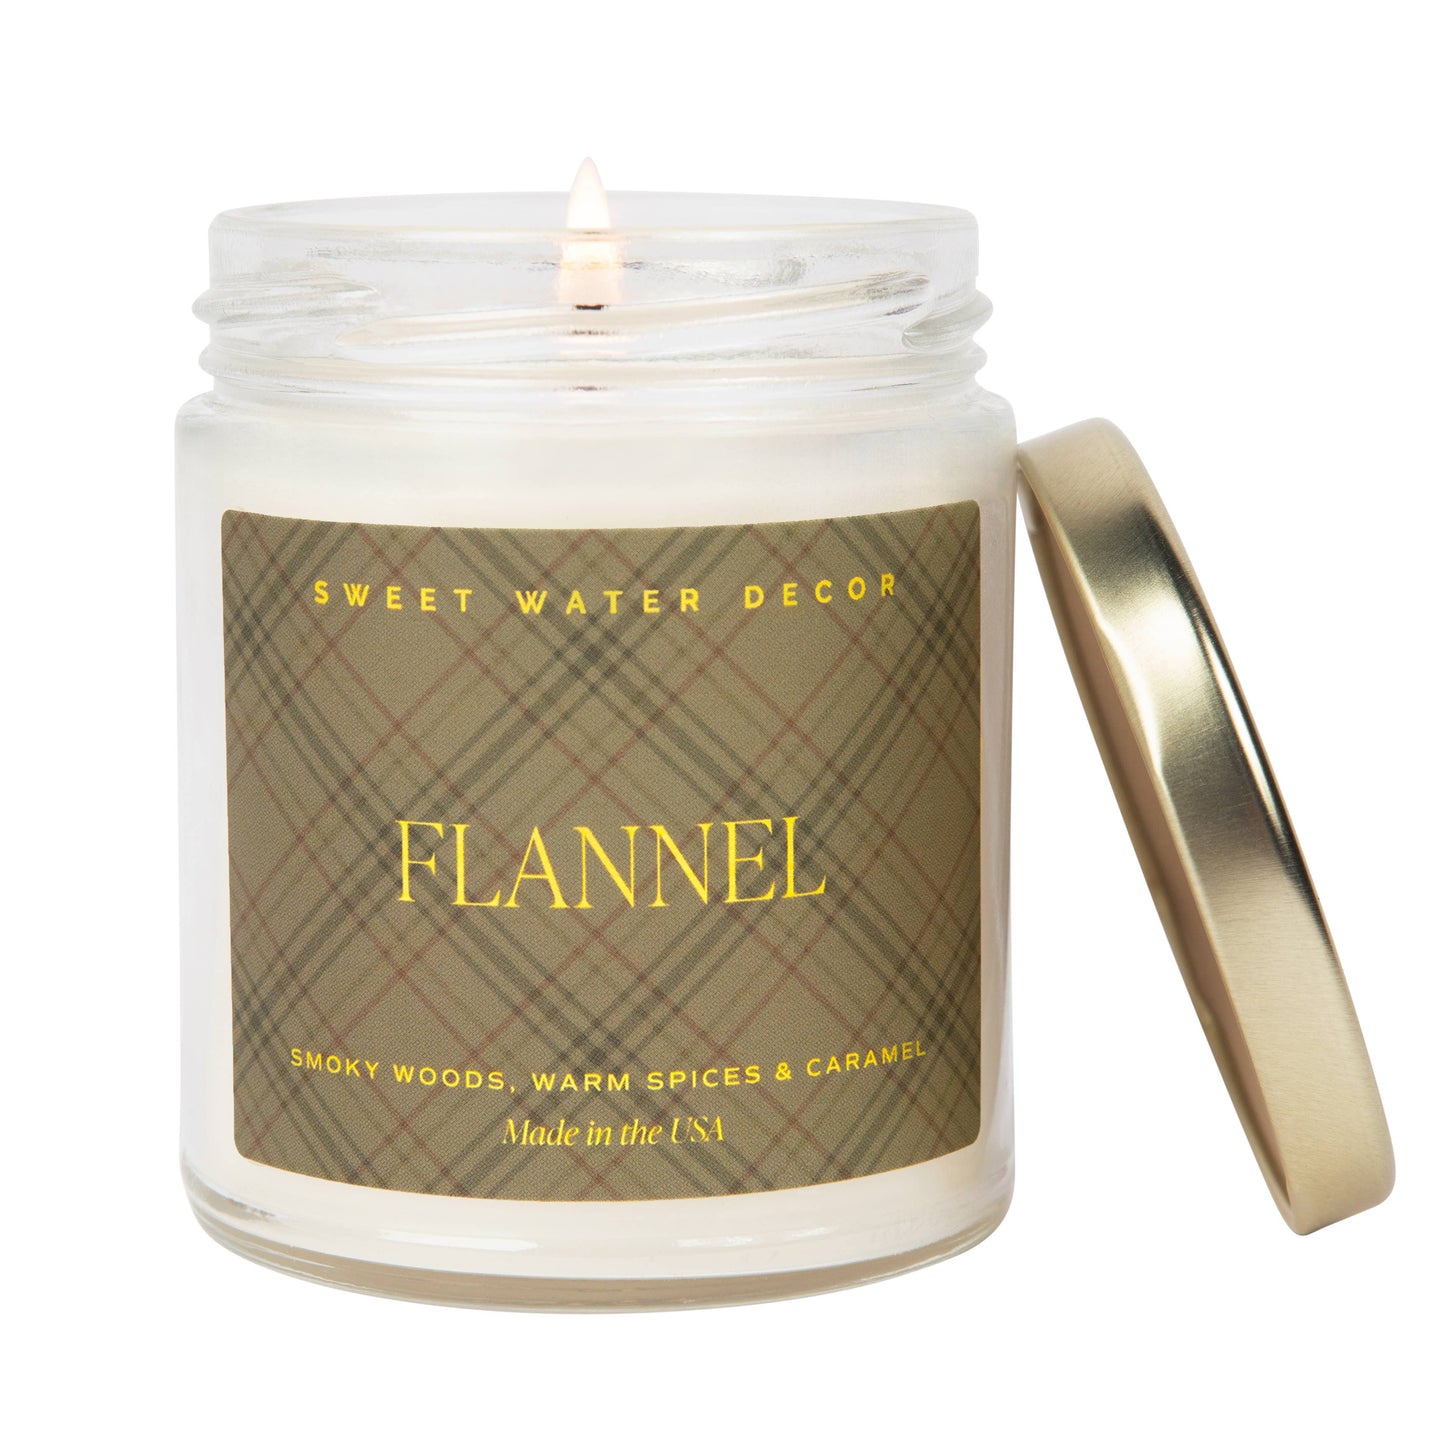 Flannel 9 oz Soy Candle - Fall Home Decor & Gifts